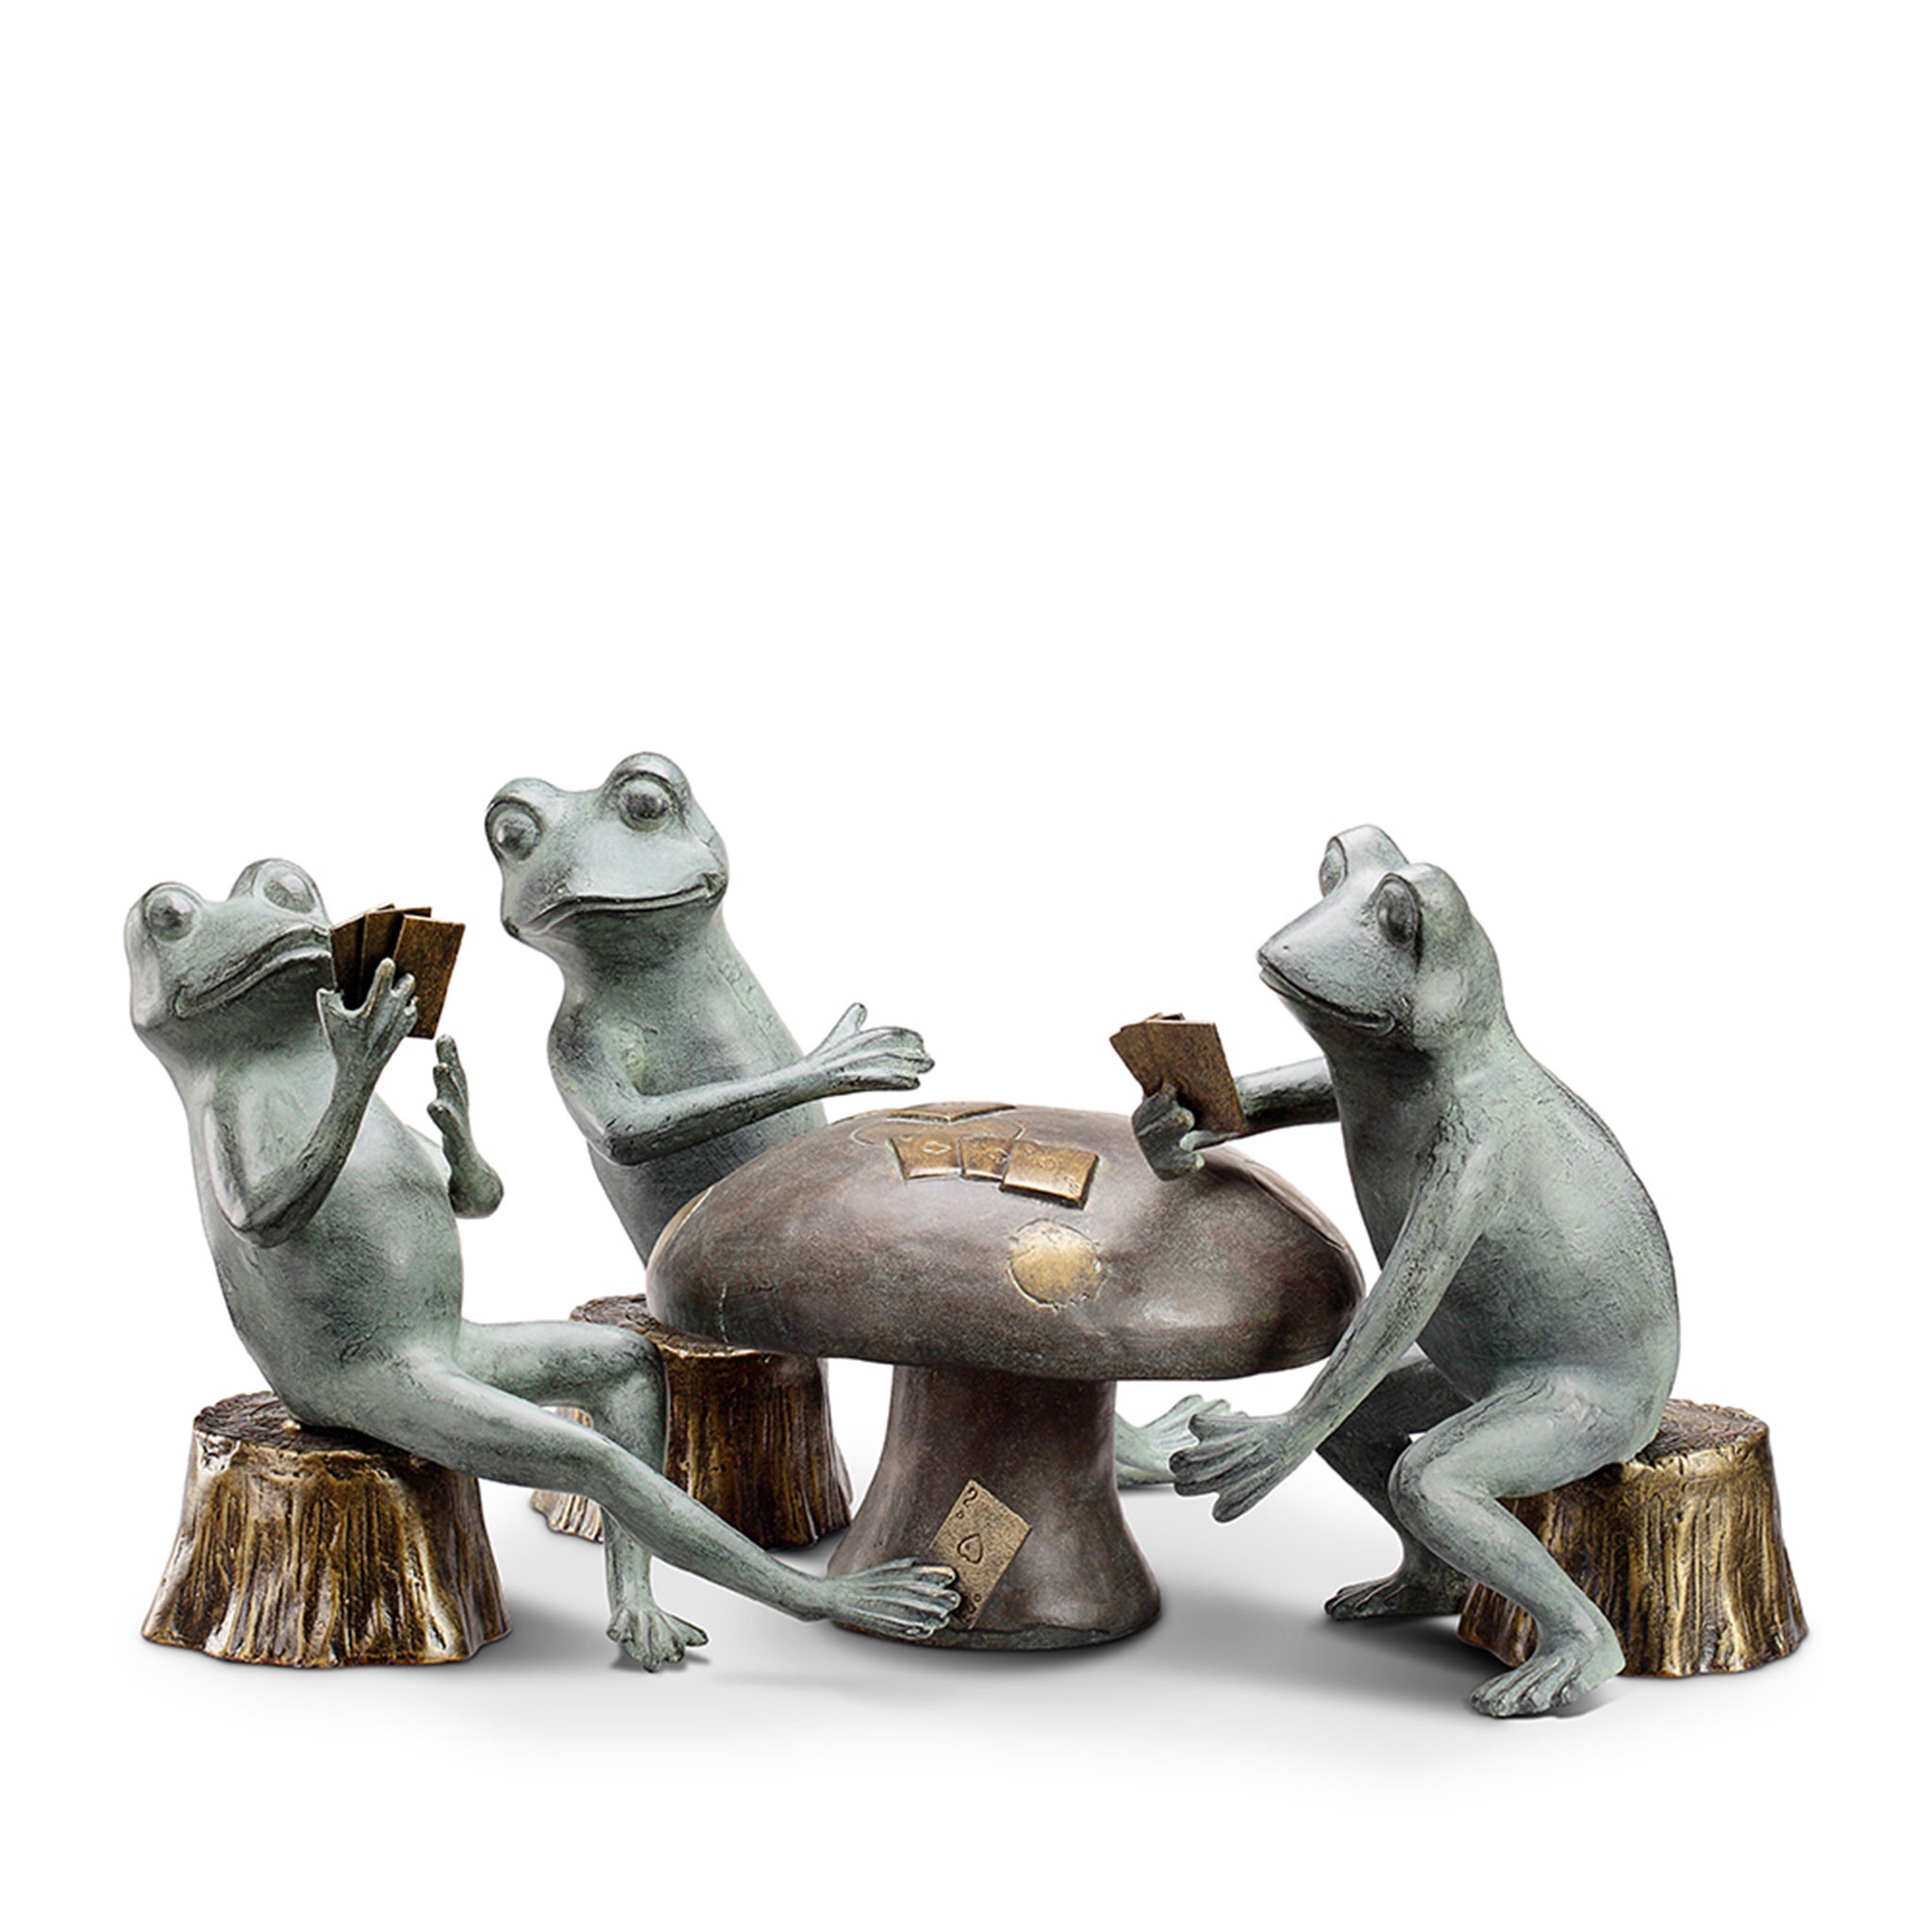 73%OFF!】【73%OFF!】SPI Home Frog With Watering Can Garden